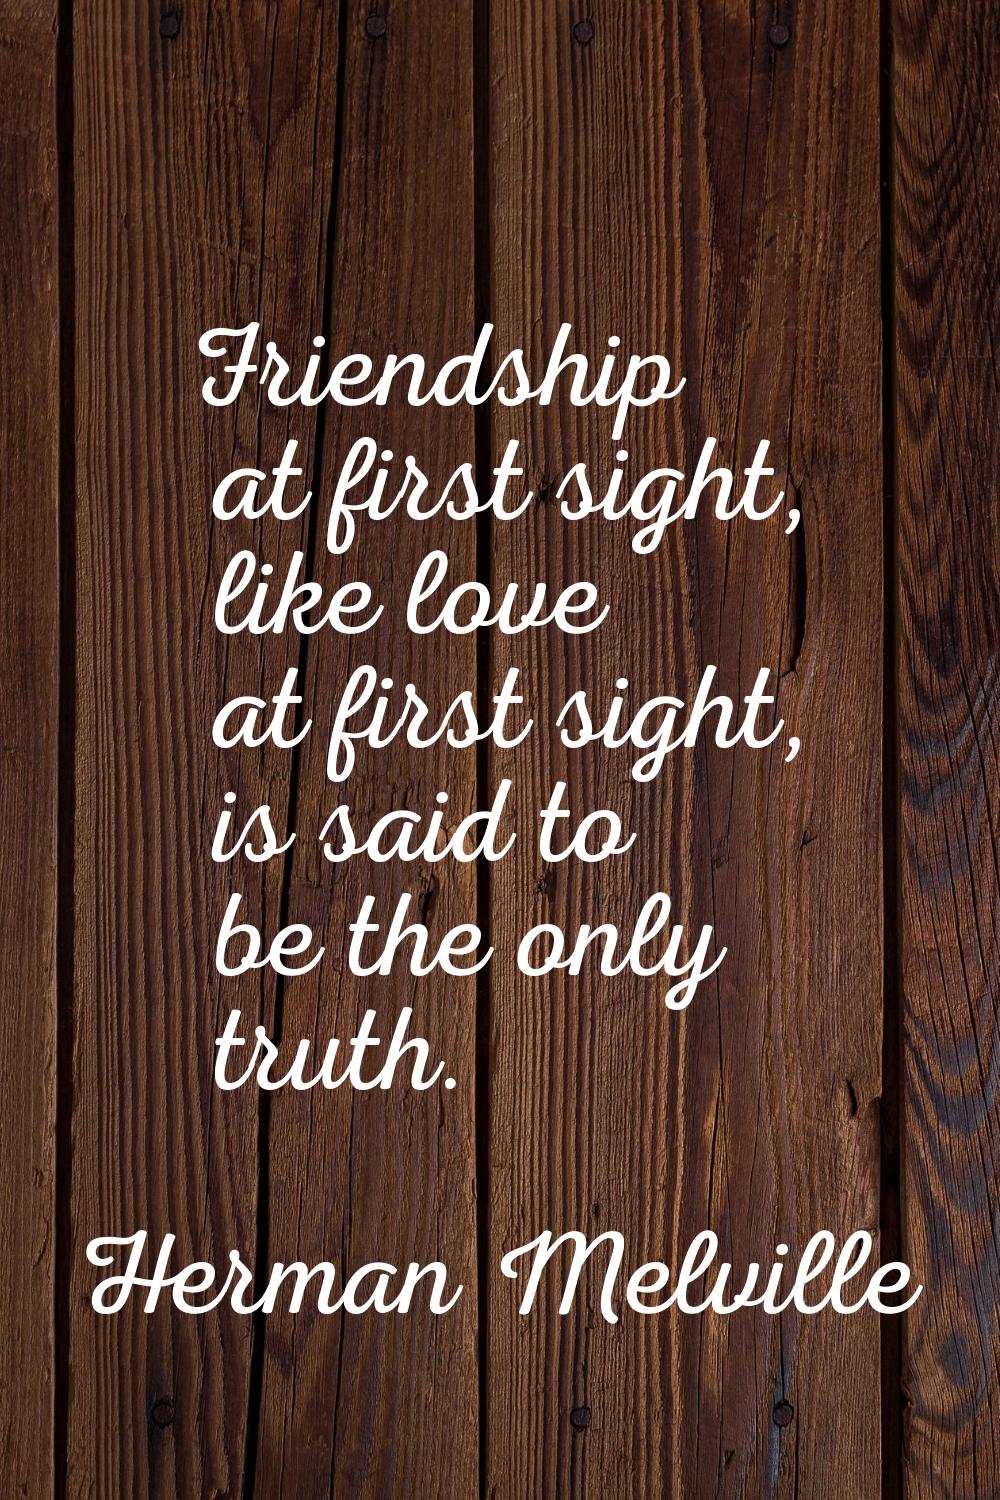 Friendship at first sight, like love at first sight, is said to be the only truth.